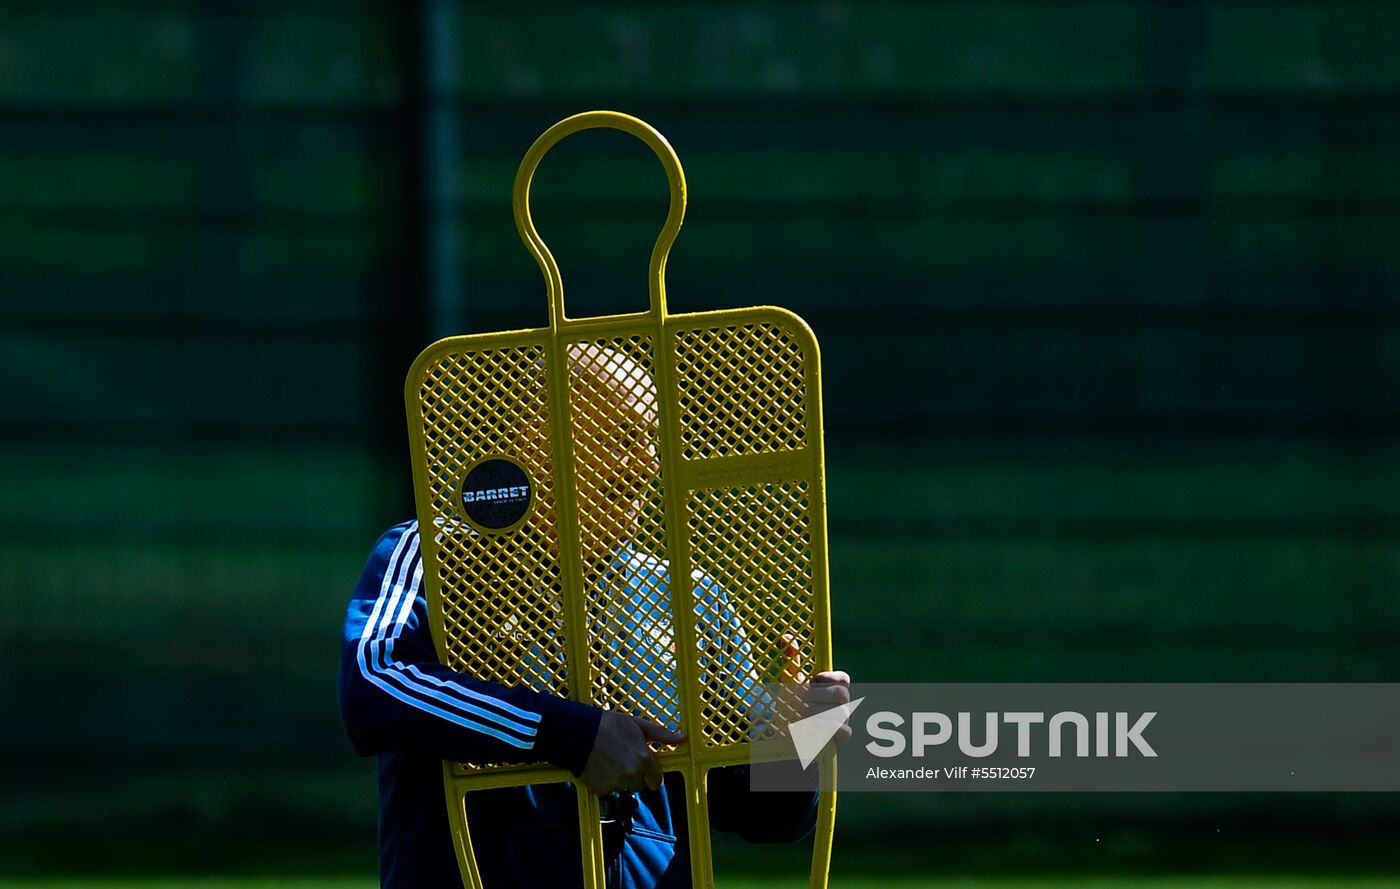 Football. Russian national team's training session